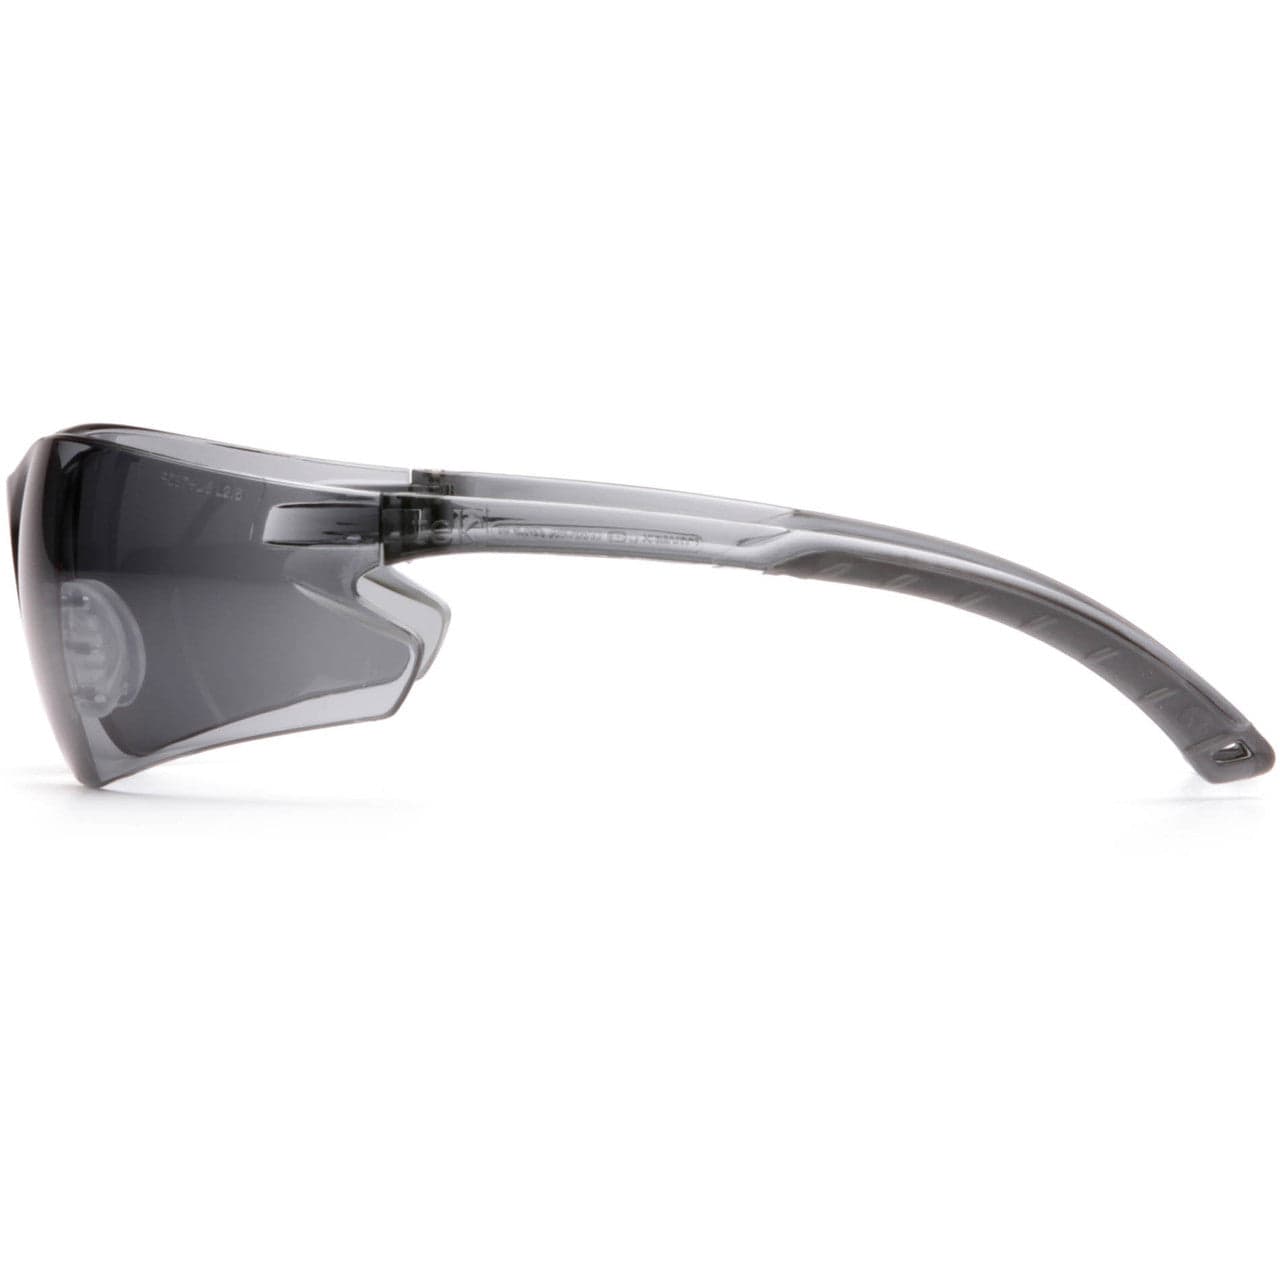 Pyramex Itek Safety Glasses with Gray Lens S5820S Side View